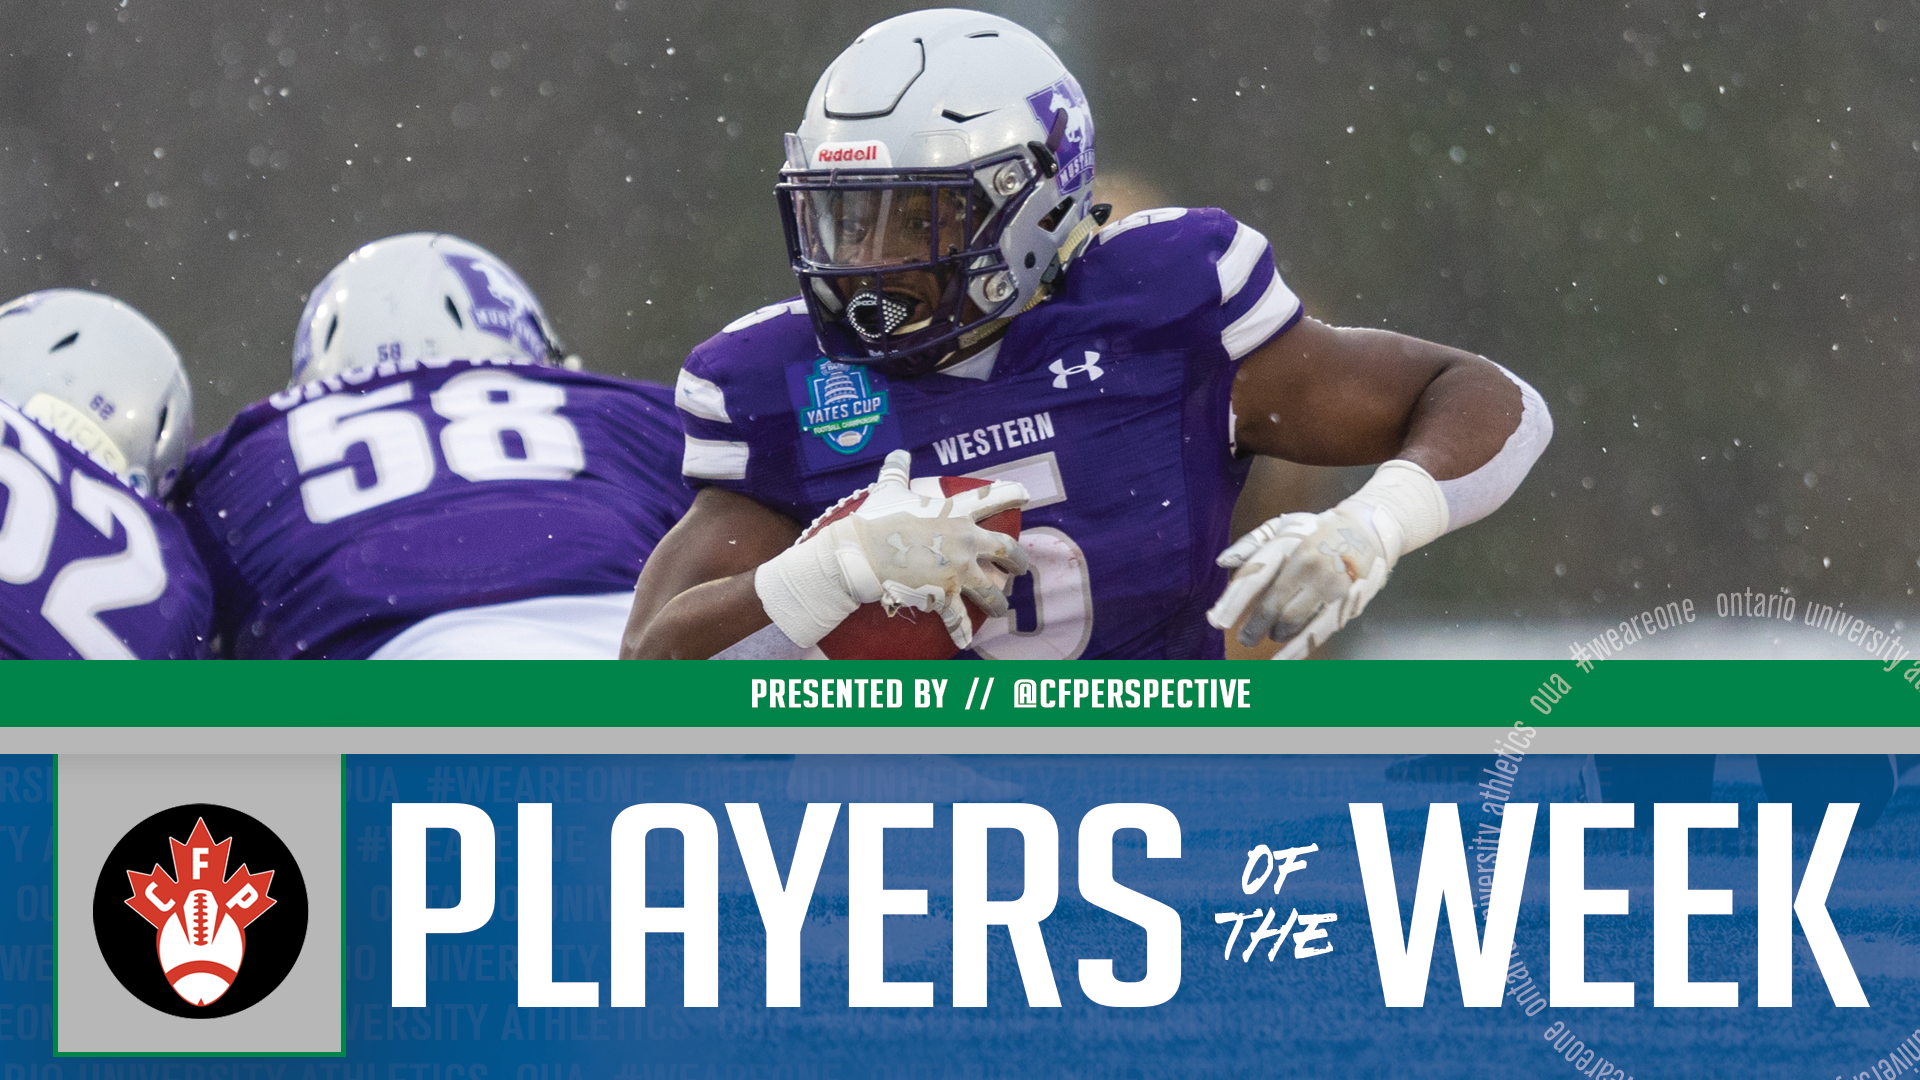 Edwards, Panabaker, Magnaye-Jones named OUA football players of the week